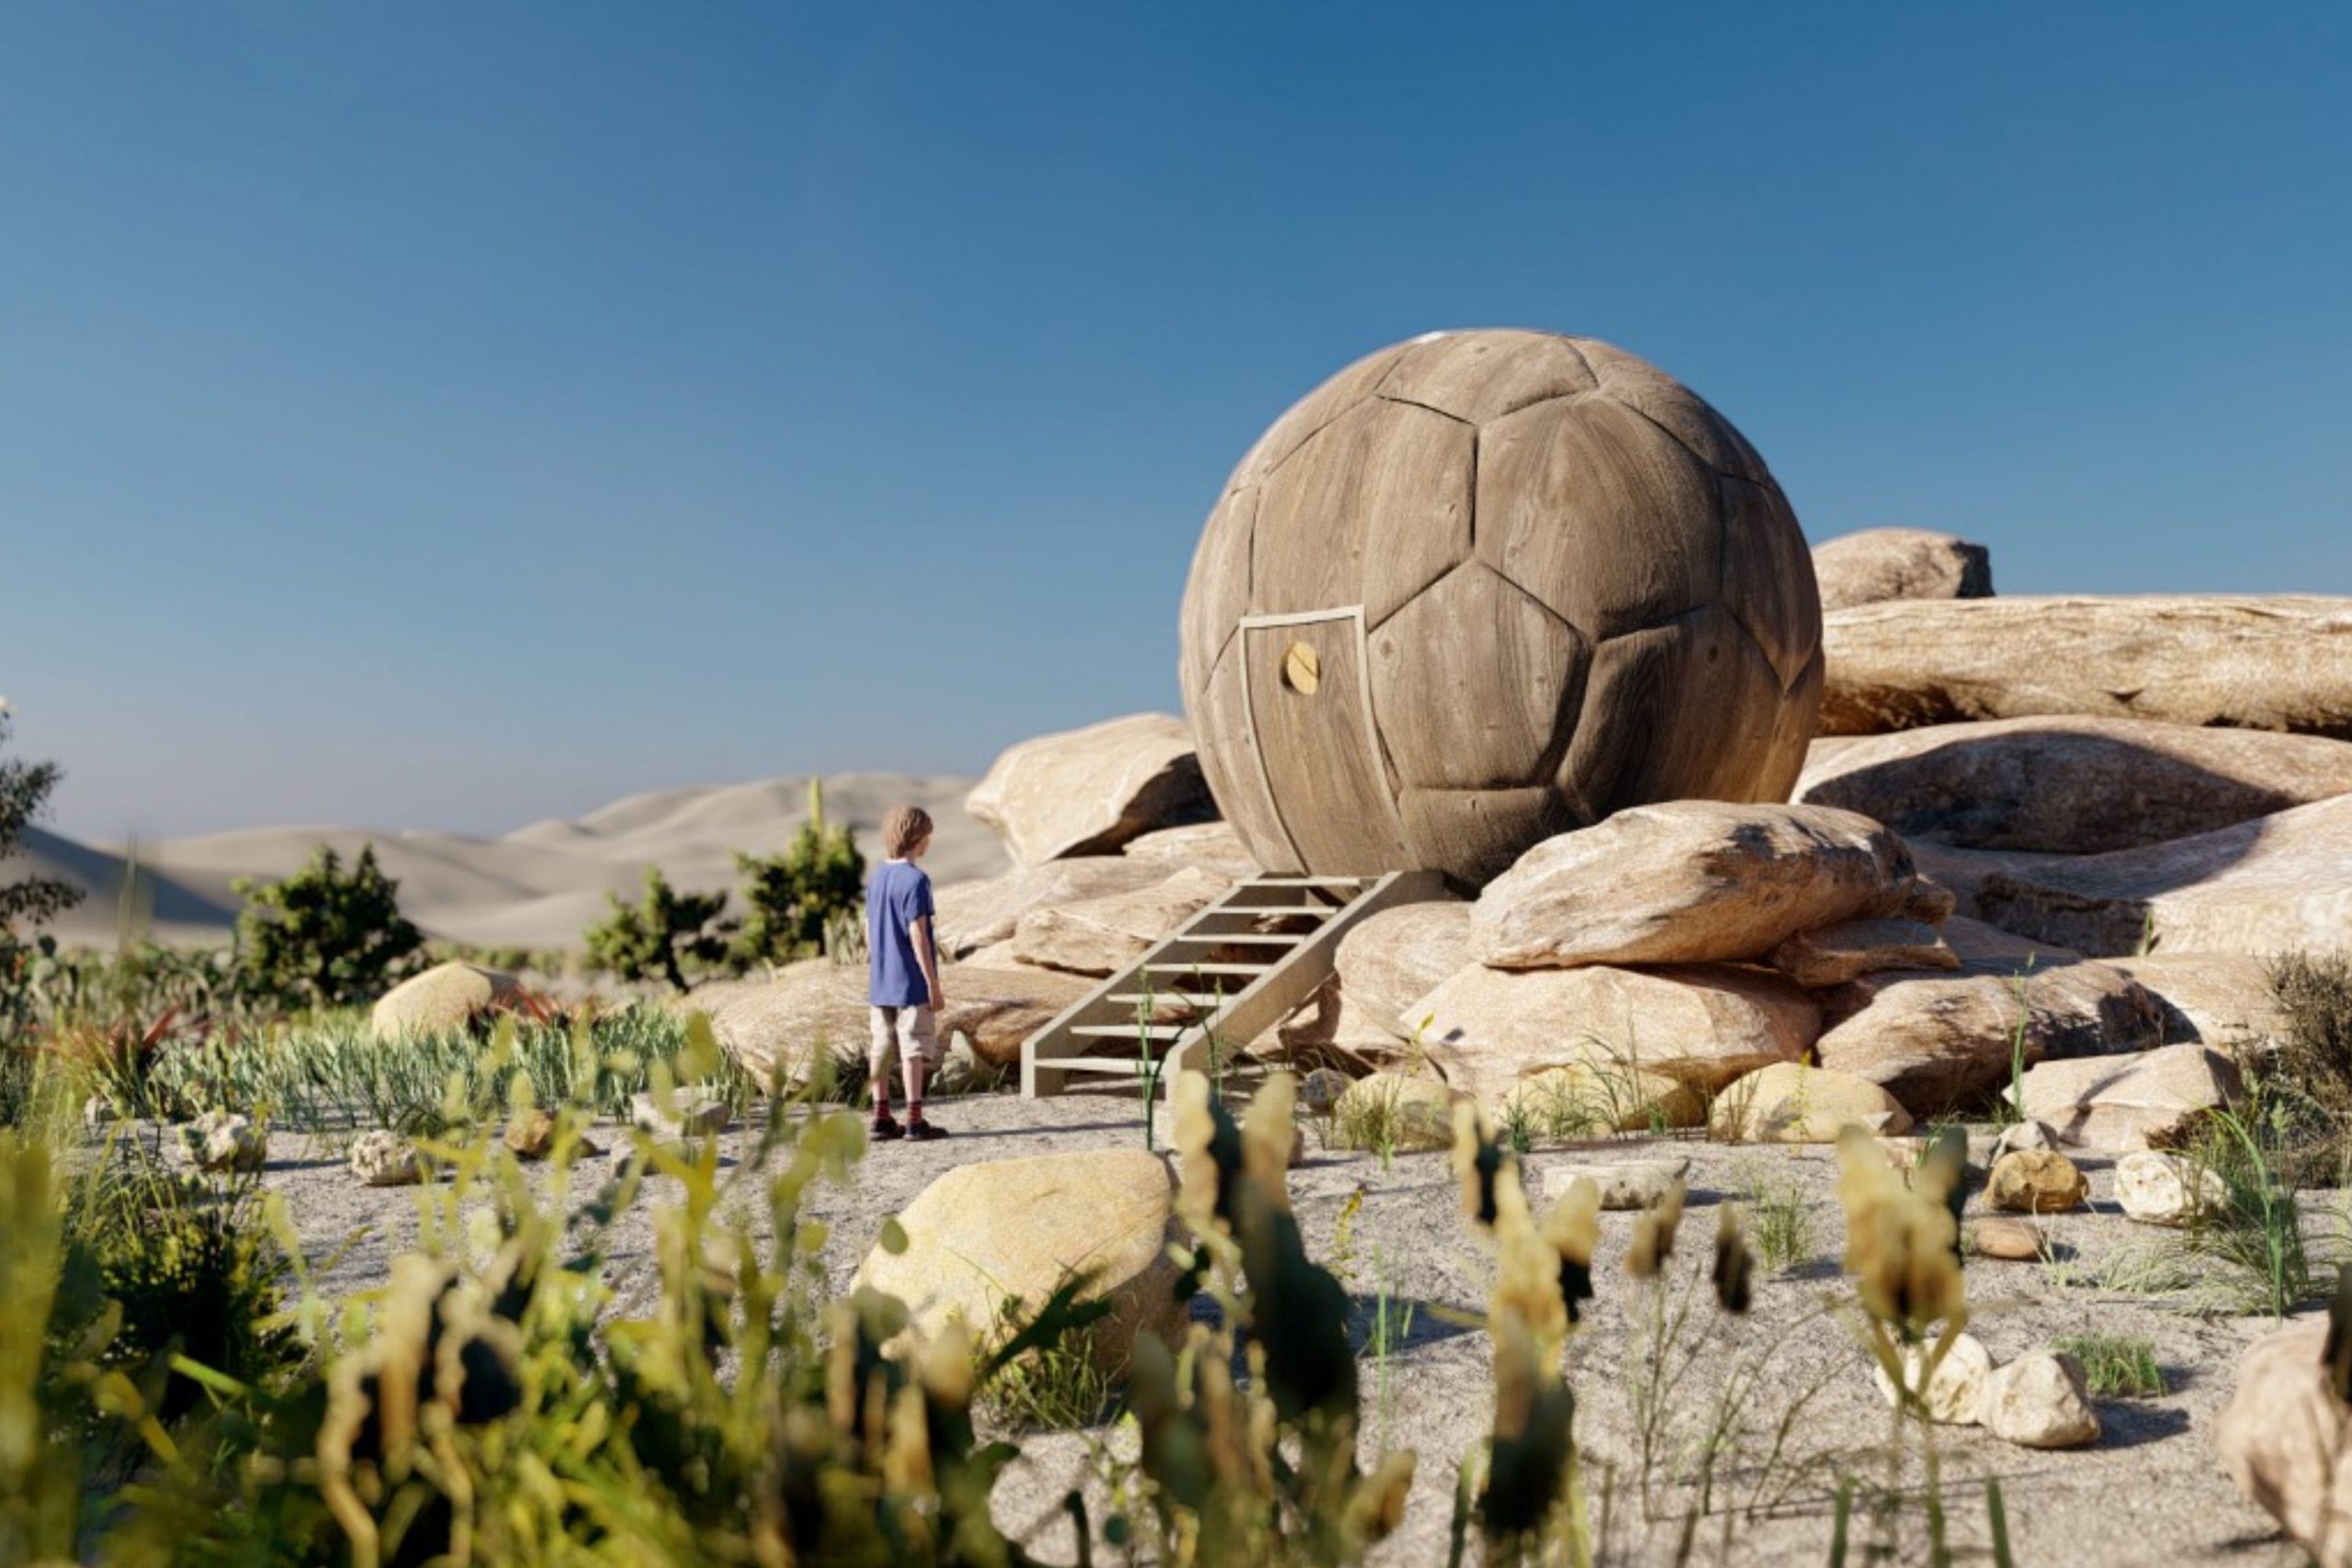 Stargazing Sphere Suspended in the Rocks by Orien R. for Airbnb OMG! Fund